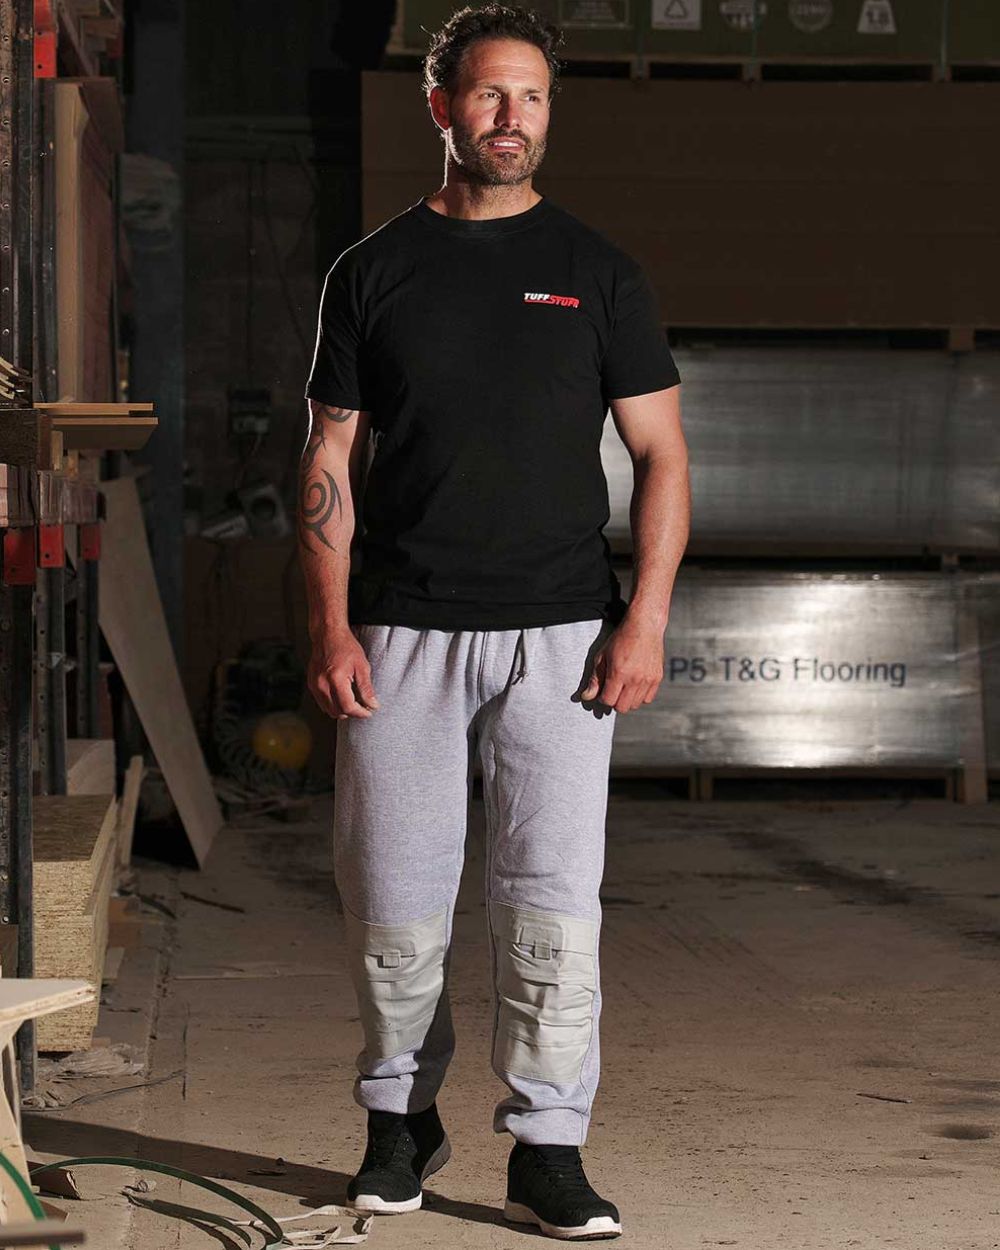 Grey Coloured TuffStuff Comfort Work Trouser On A Factory Background 